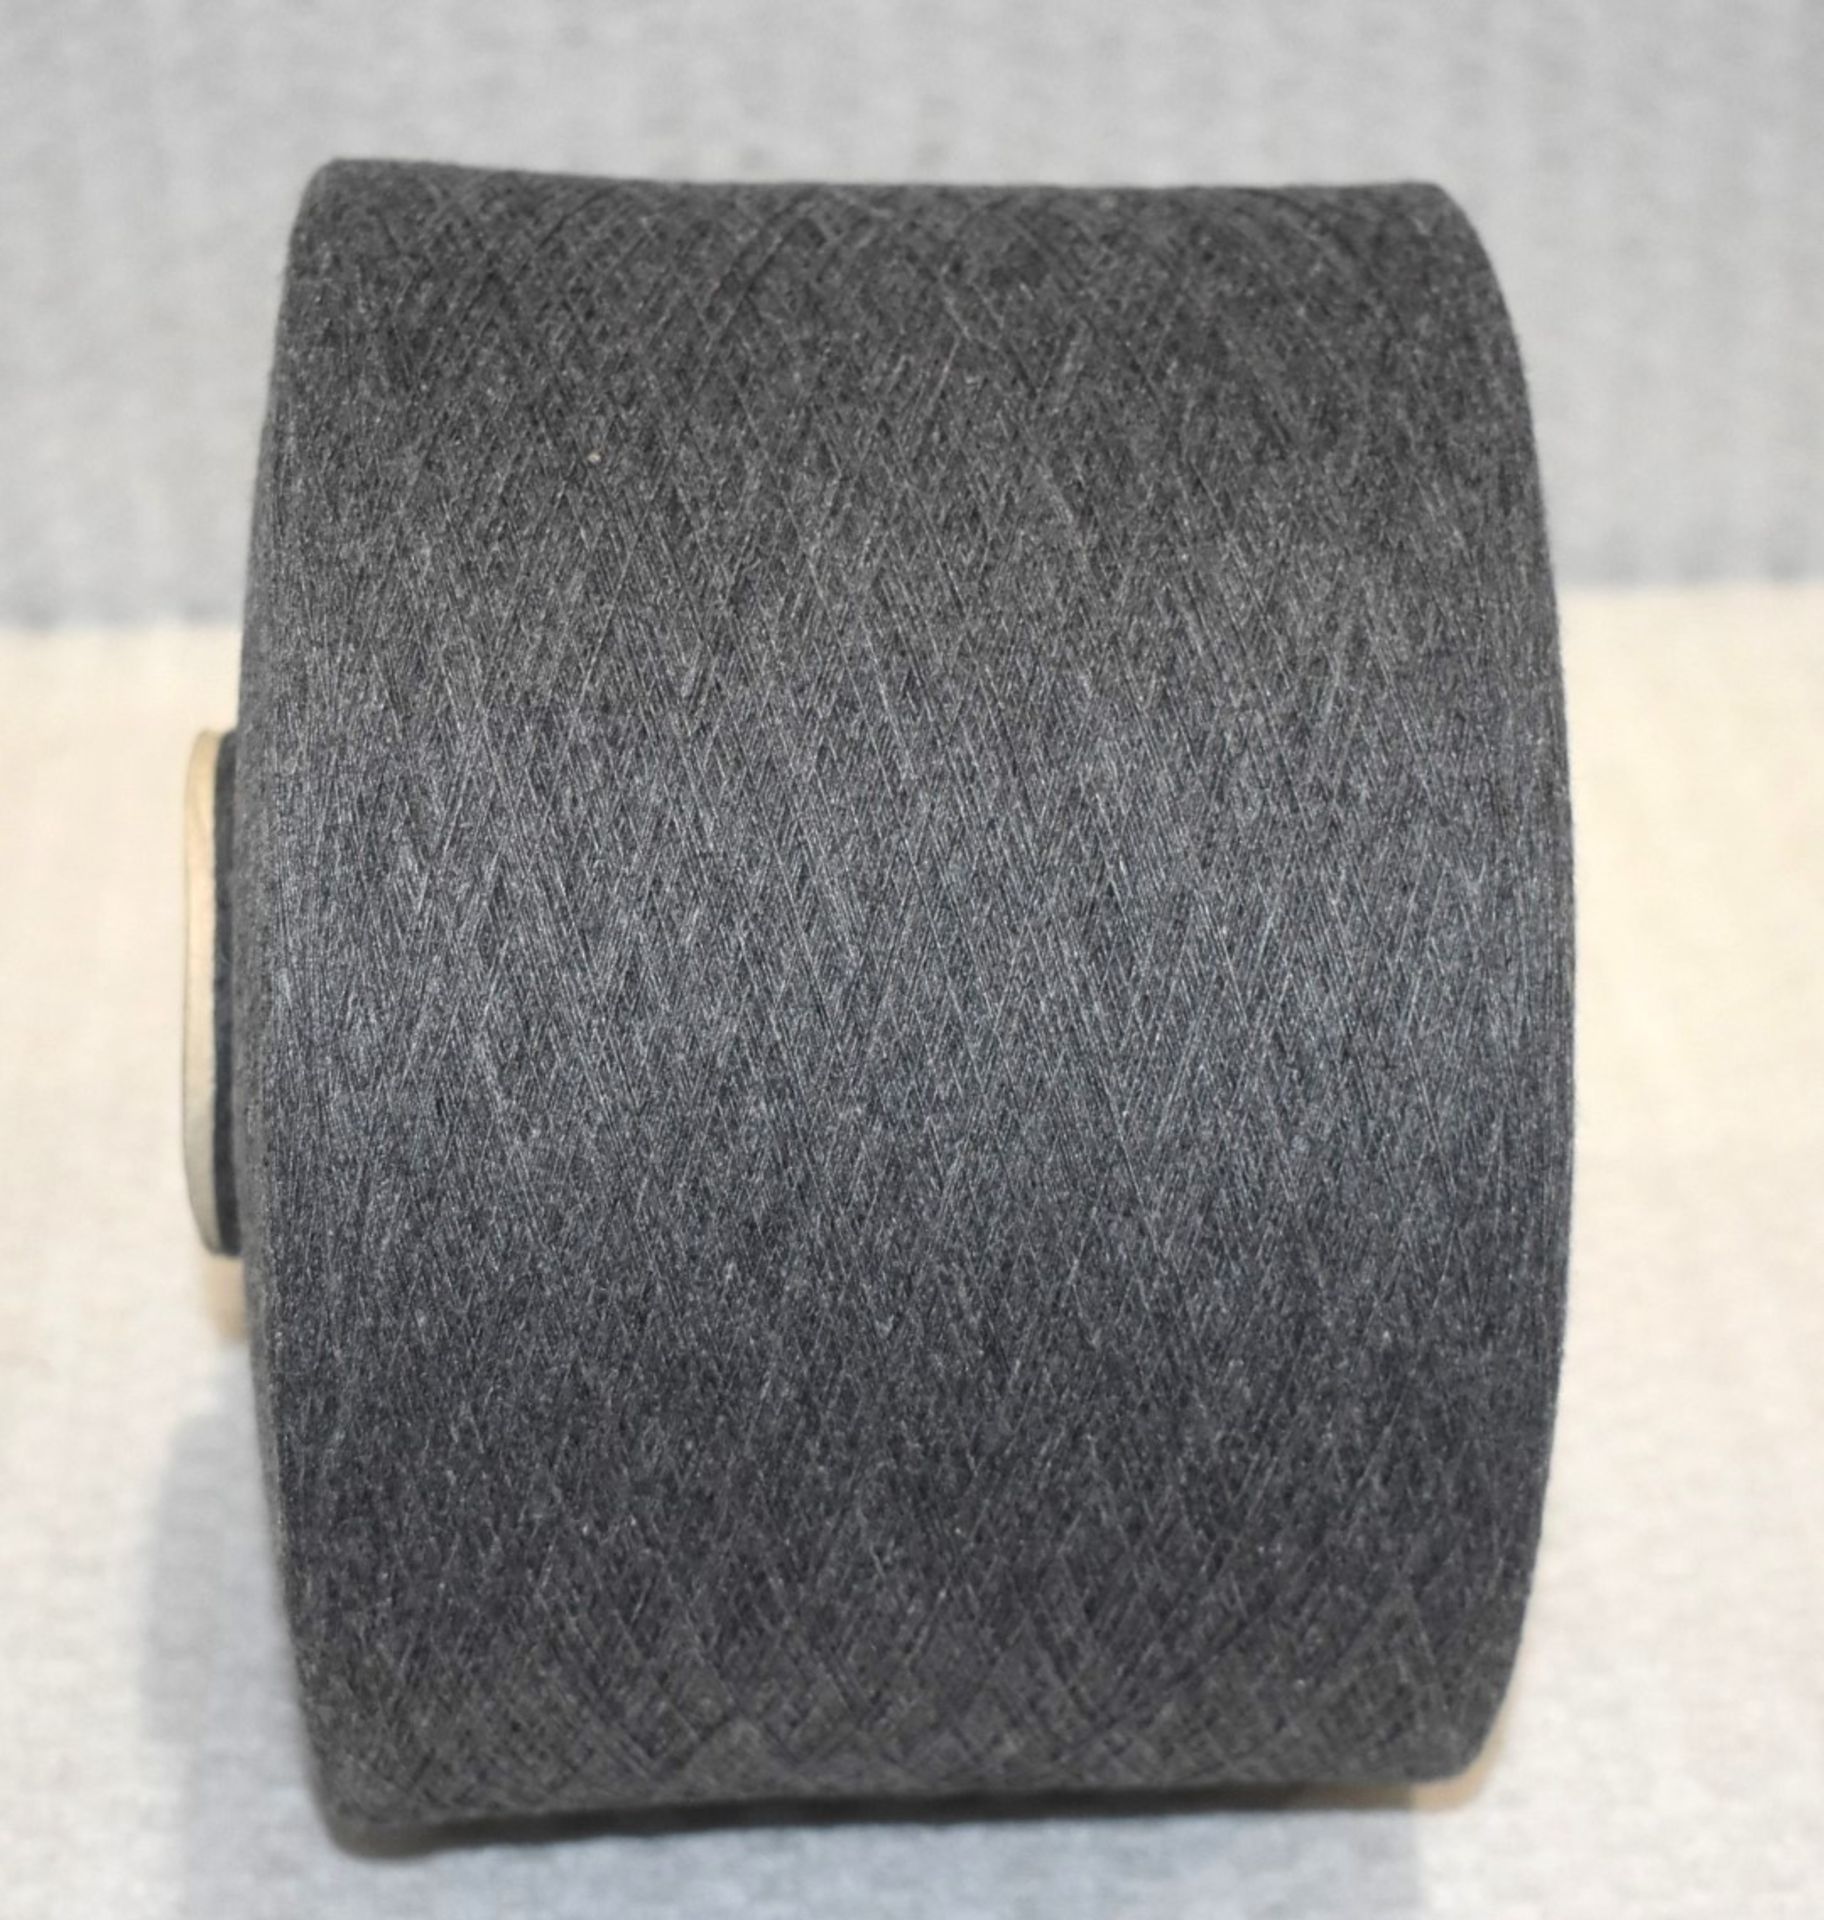 1 x Cone of 1/13 MicroCotton Knitting Yarn - Mid Grey - Approx Weight: 2,500g - New Stock ABL Yarn - Image 17 of 18